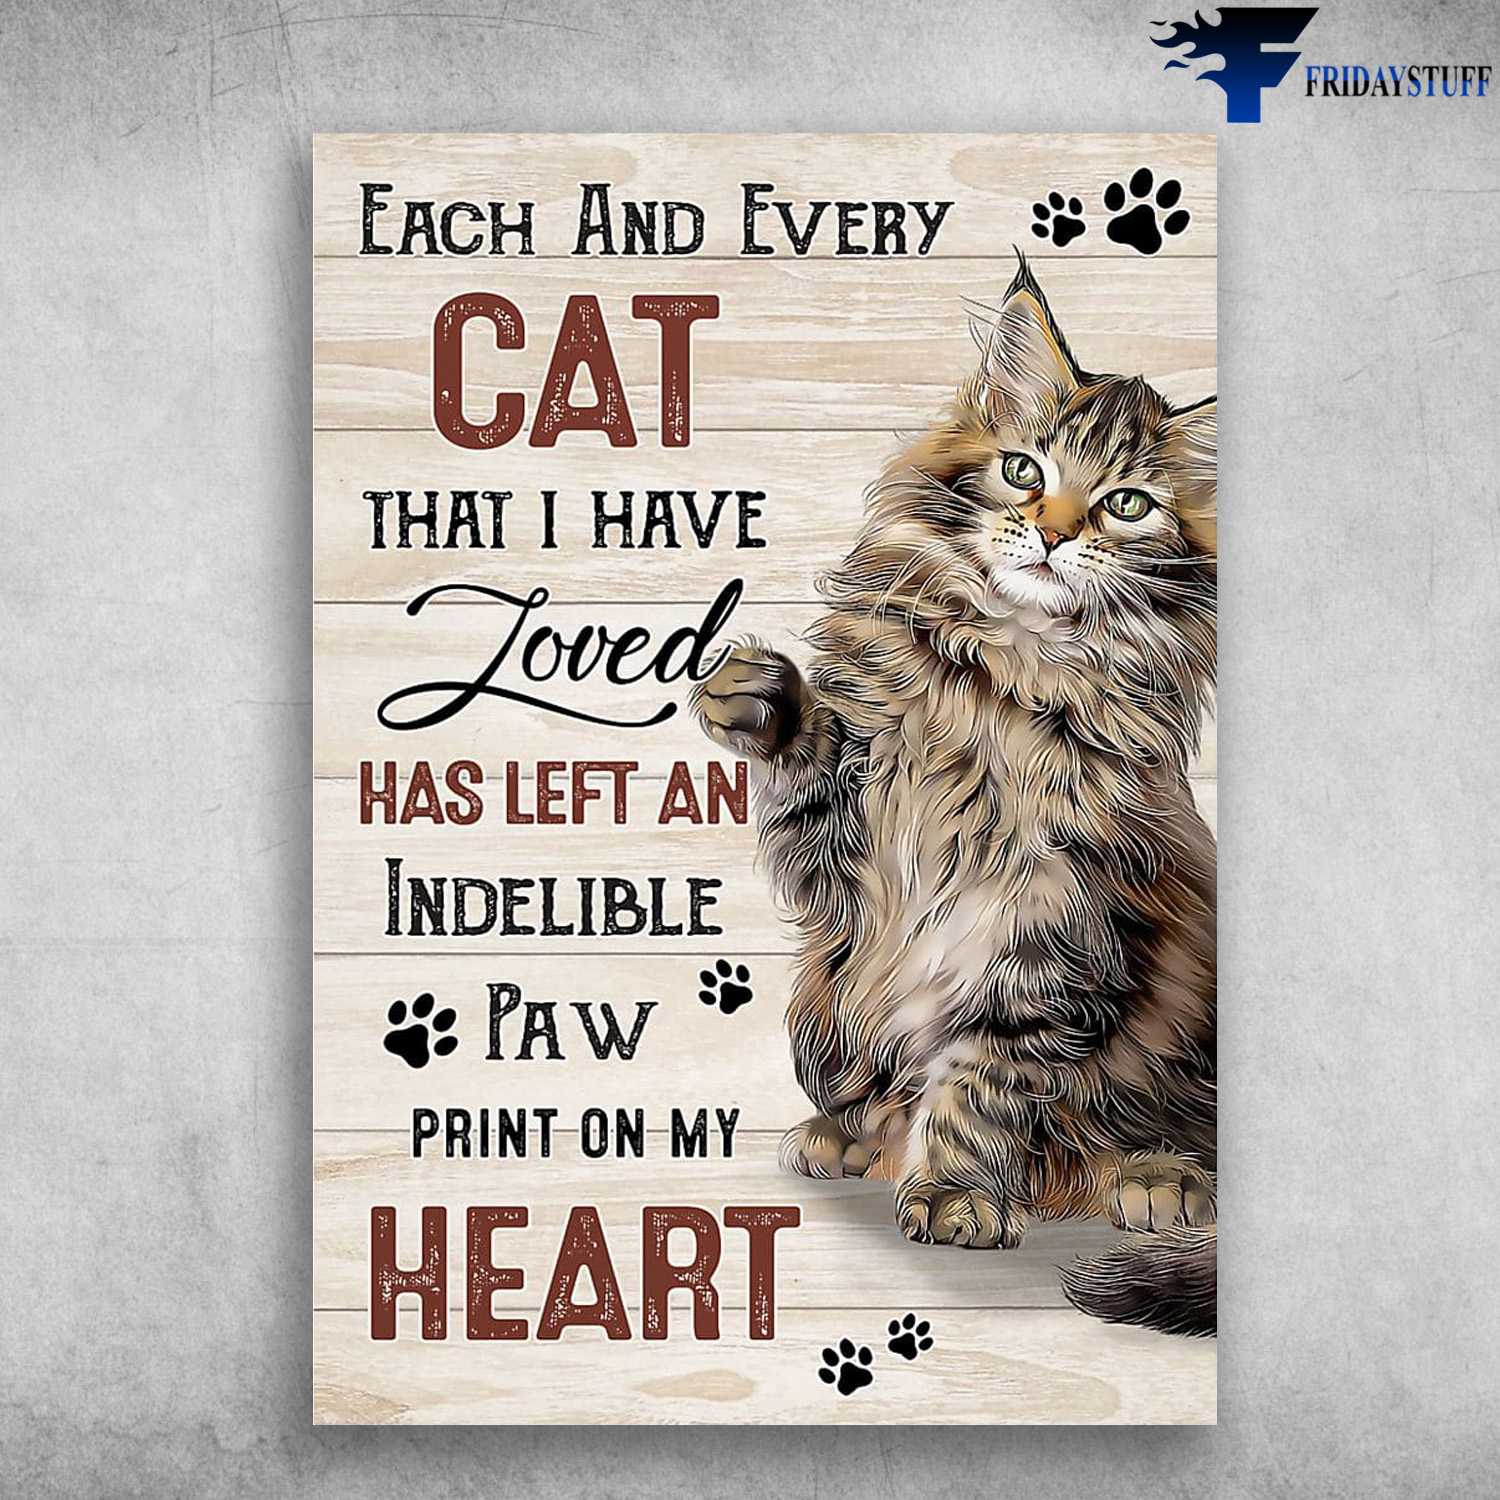 Cat Lover, Cat Poster, Each And Every Cat That I Have Loved, Has Left And Indelible Paw, Print On My Heart